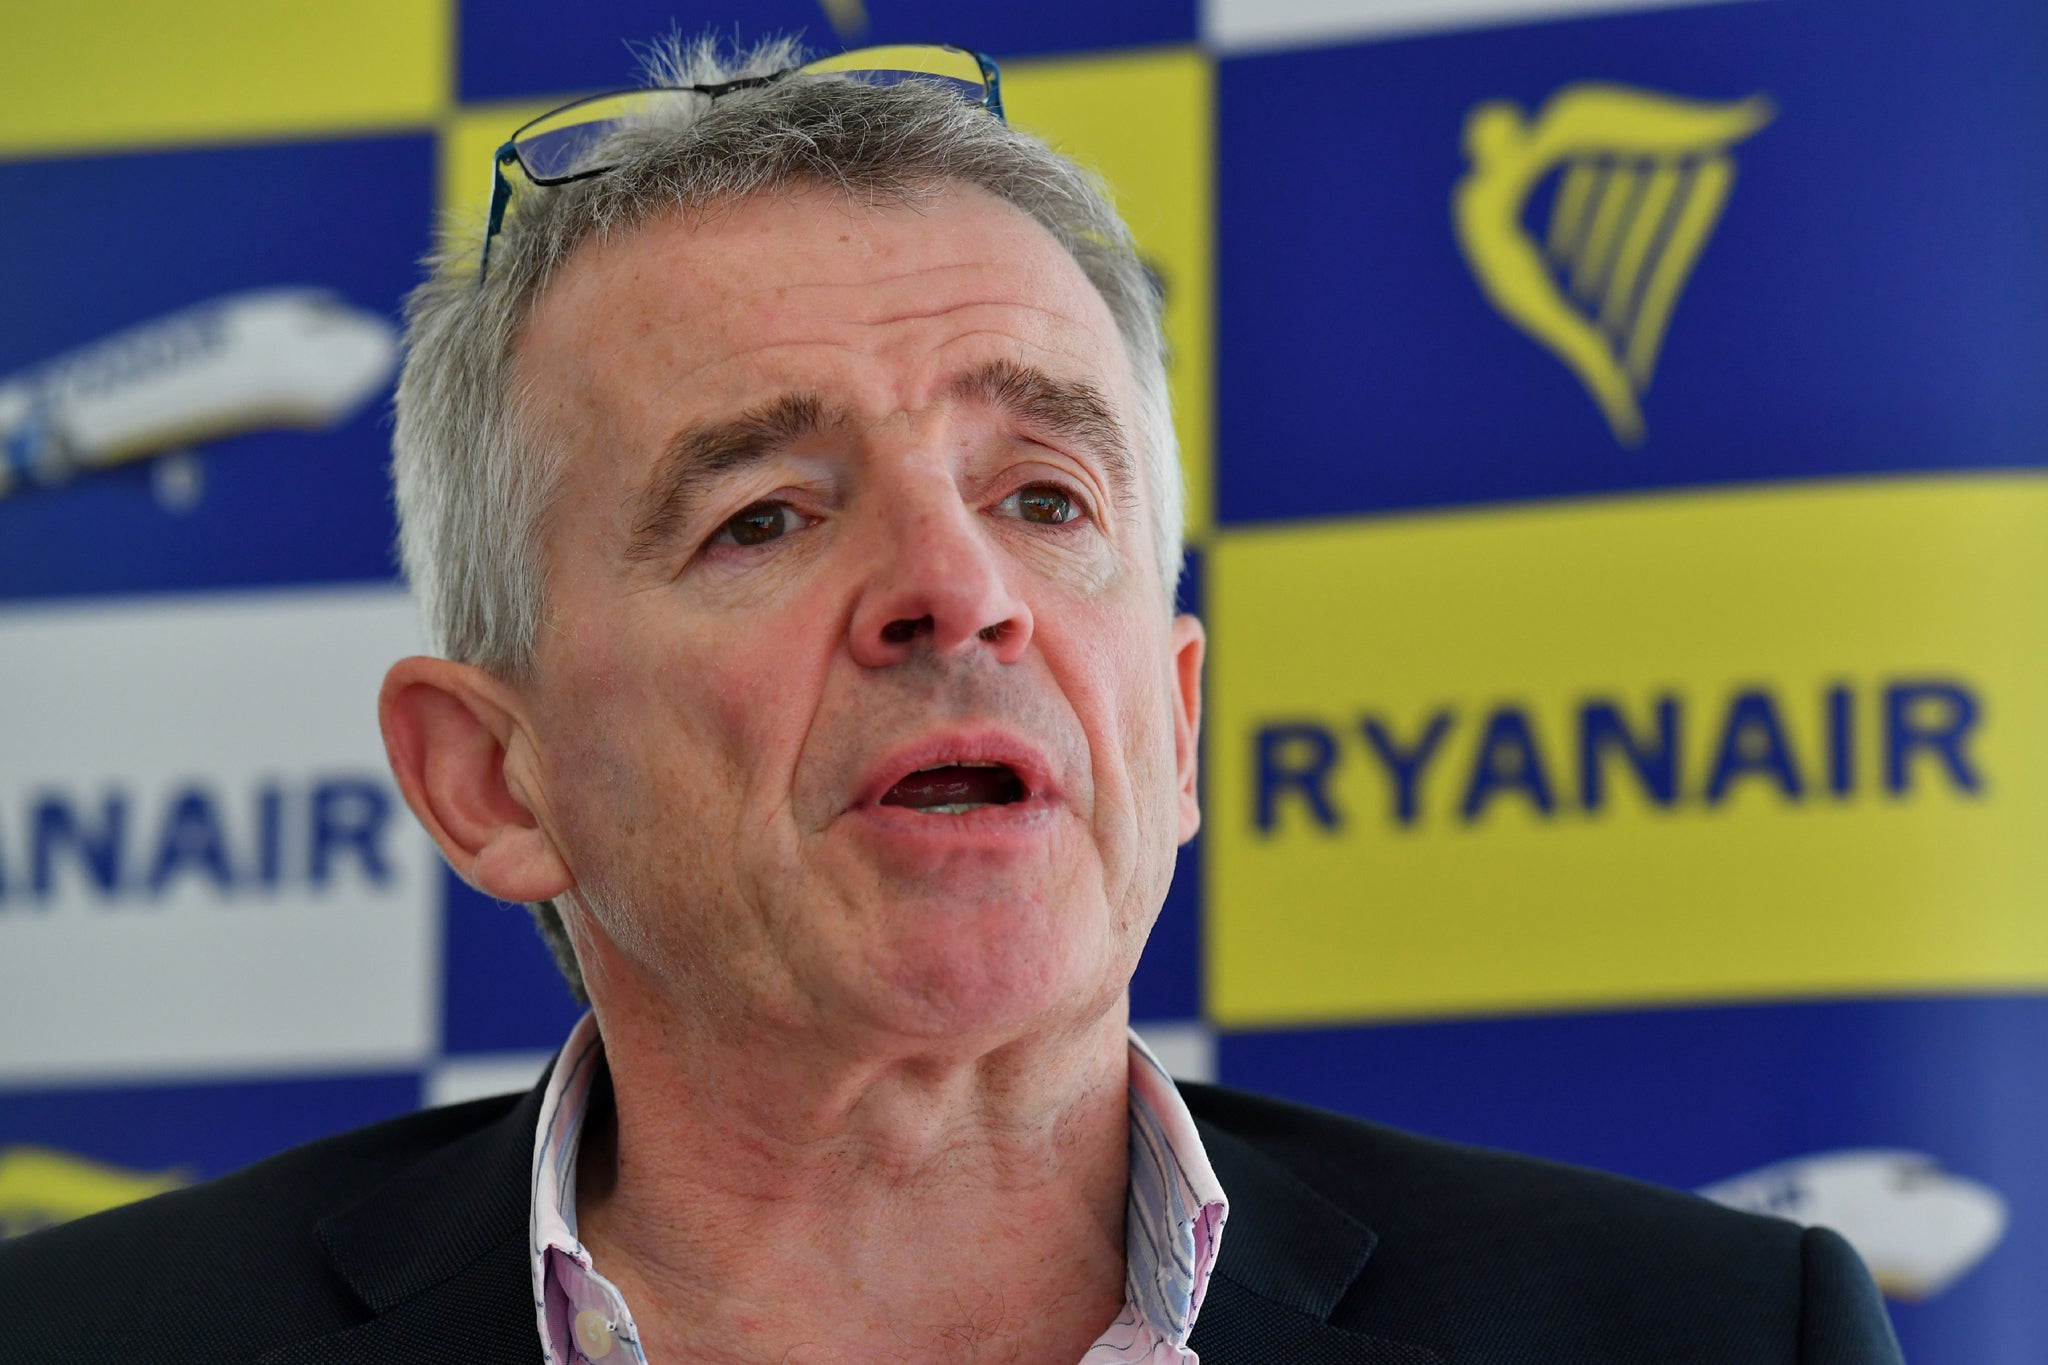 Ryanair CEO Michael O'Leary has issued a stark warning over Brexit